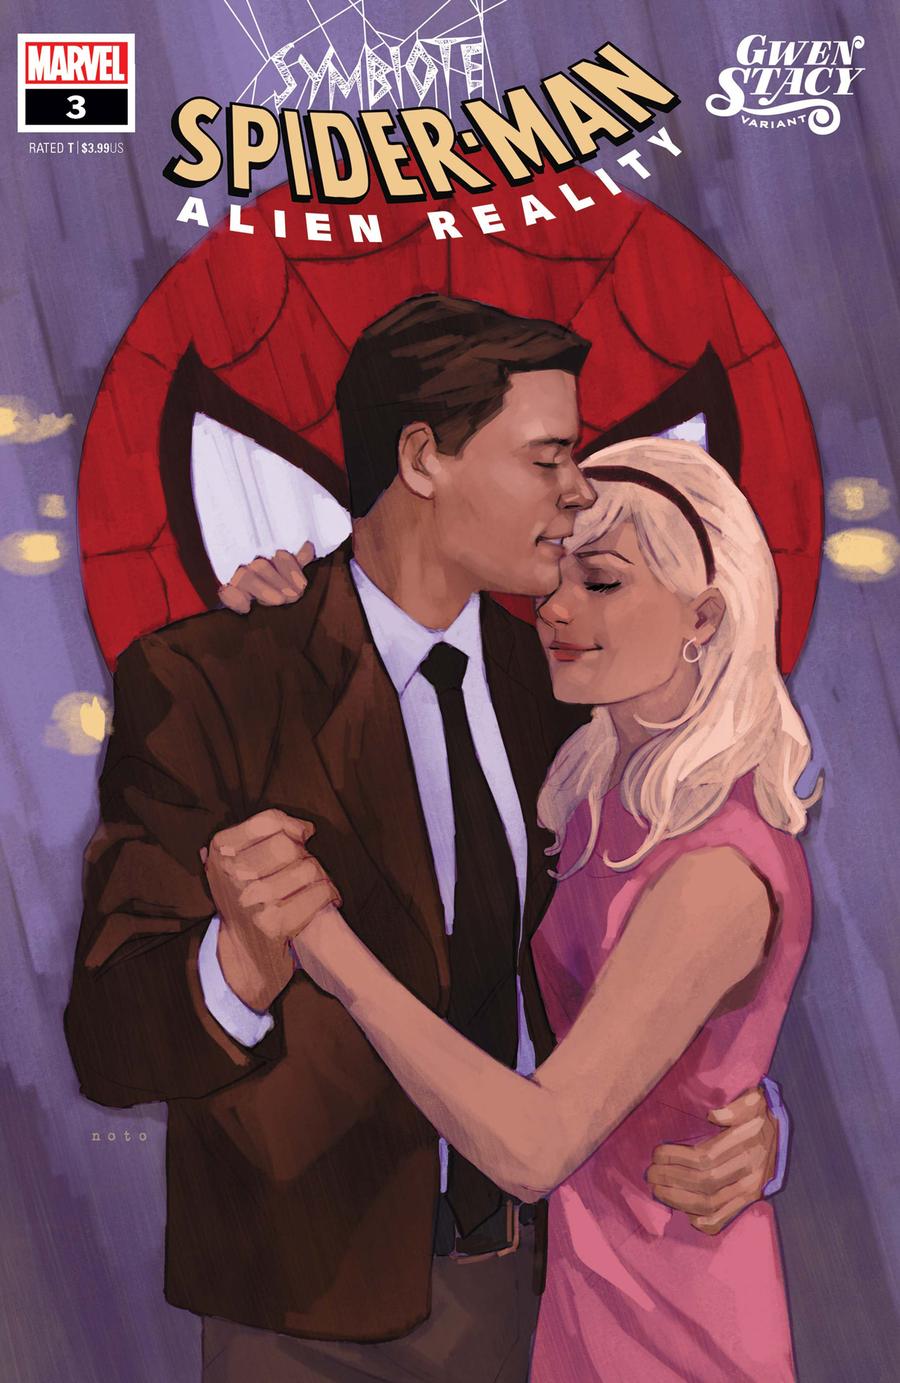 Symbiote Spider-Man Alien Reality #3 Cover B Variant Phil Noto Gwen Stacy Cover